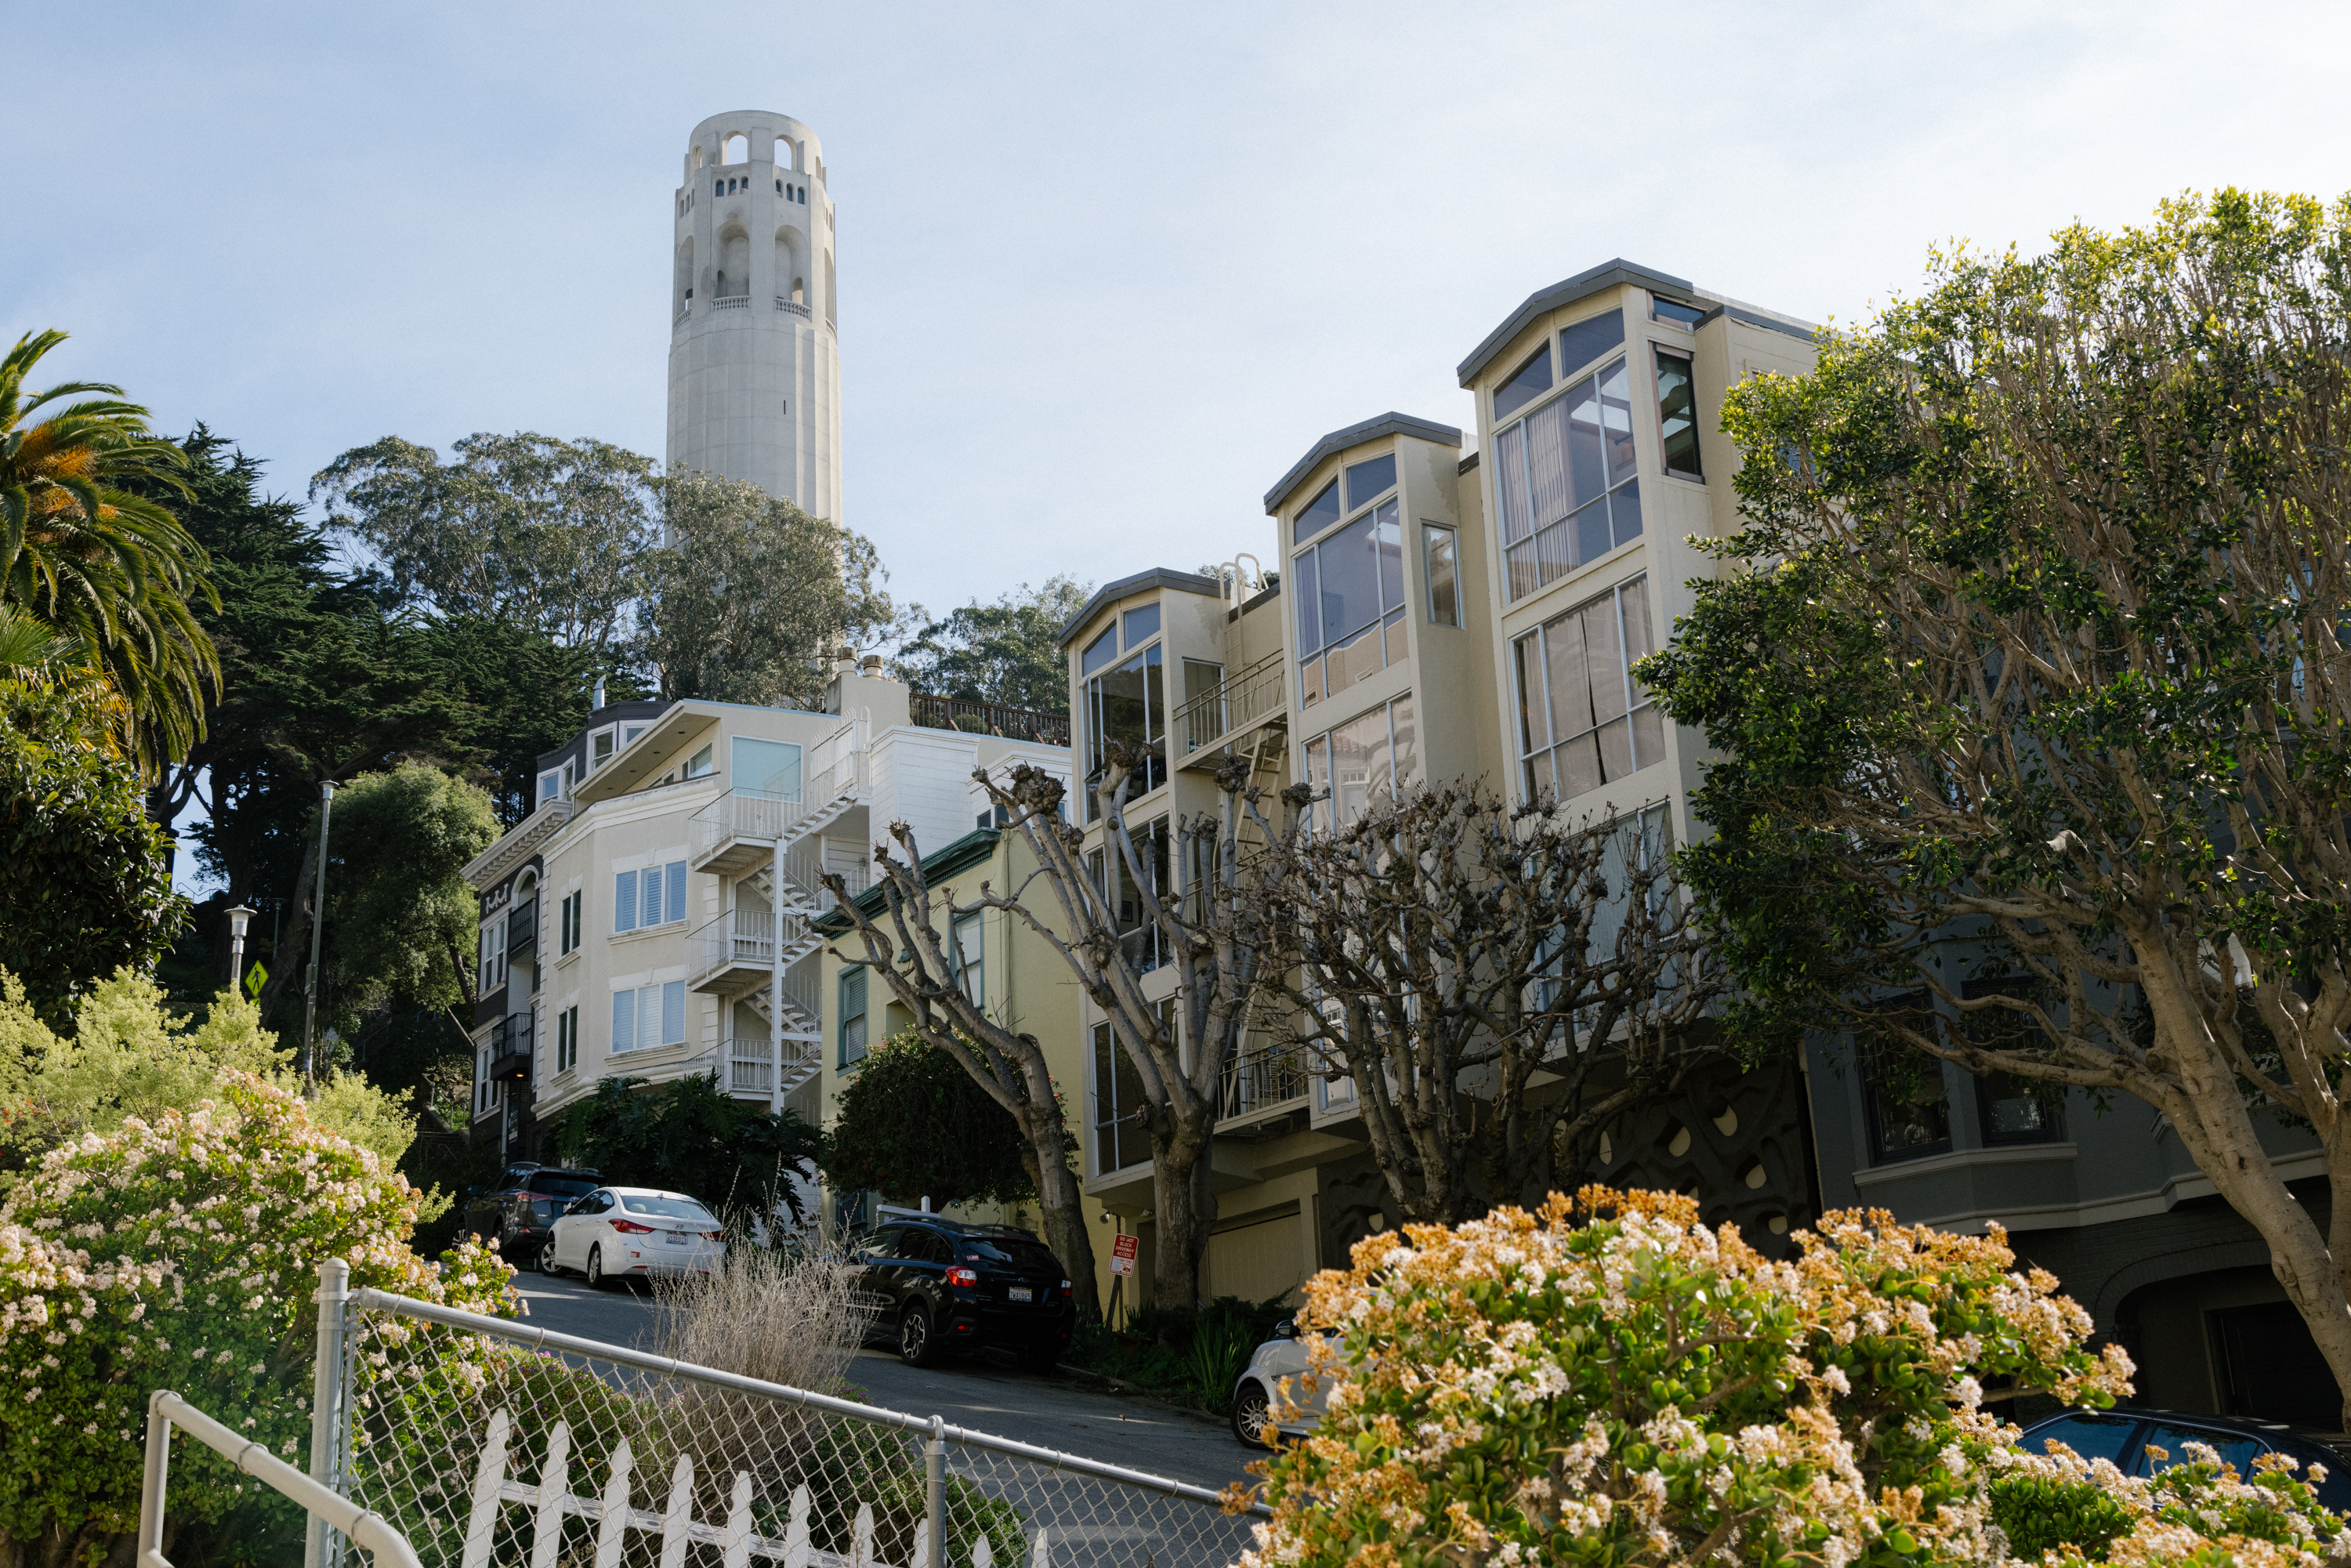 A cityscape with Coit Tower atop a hill, flanked by trees and terraced modern houses under a clear sky.